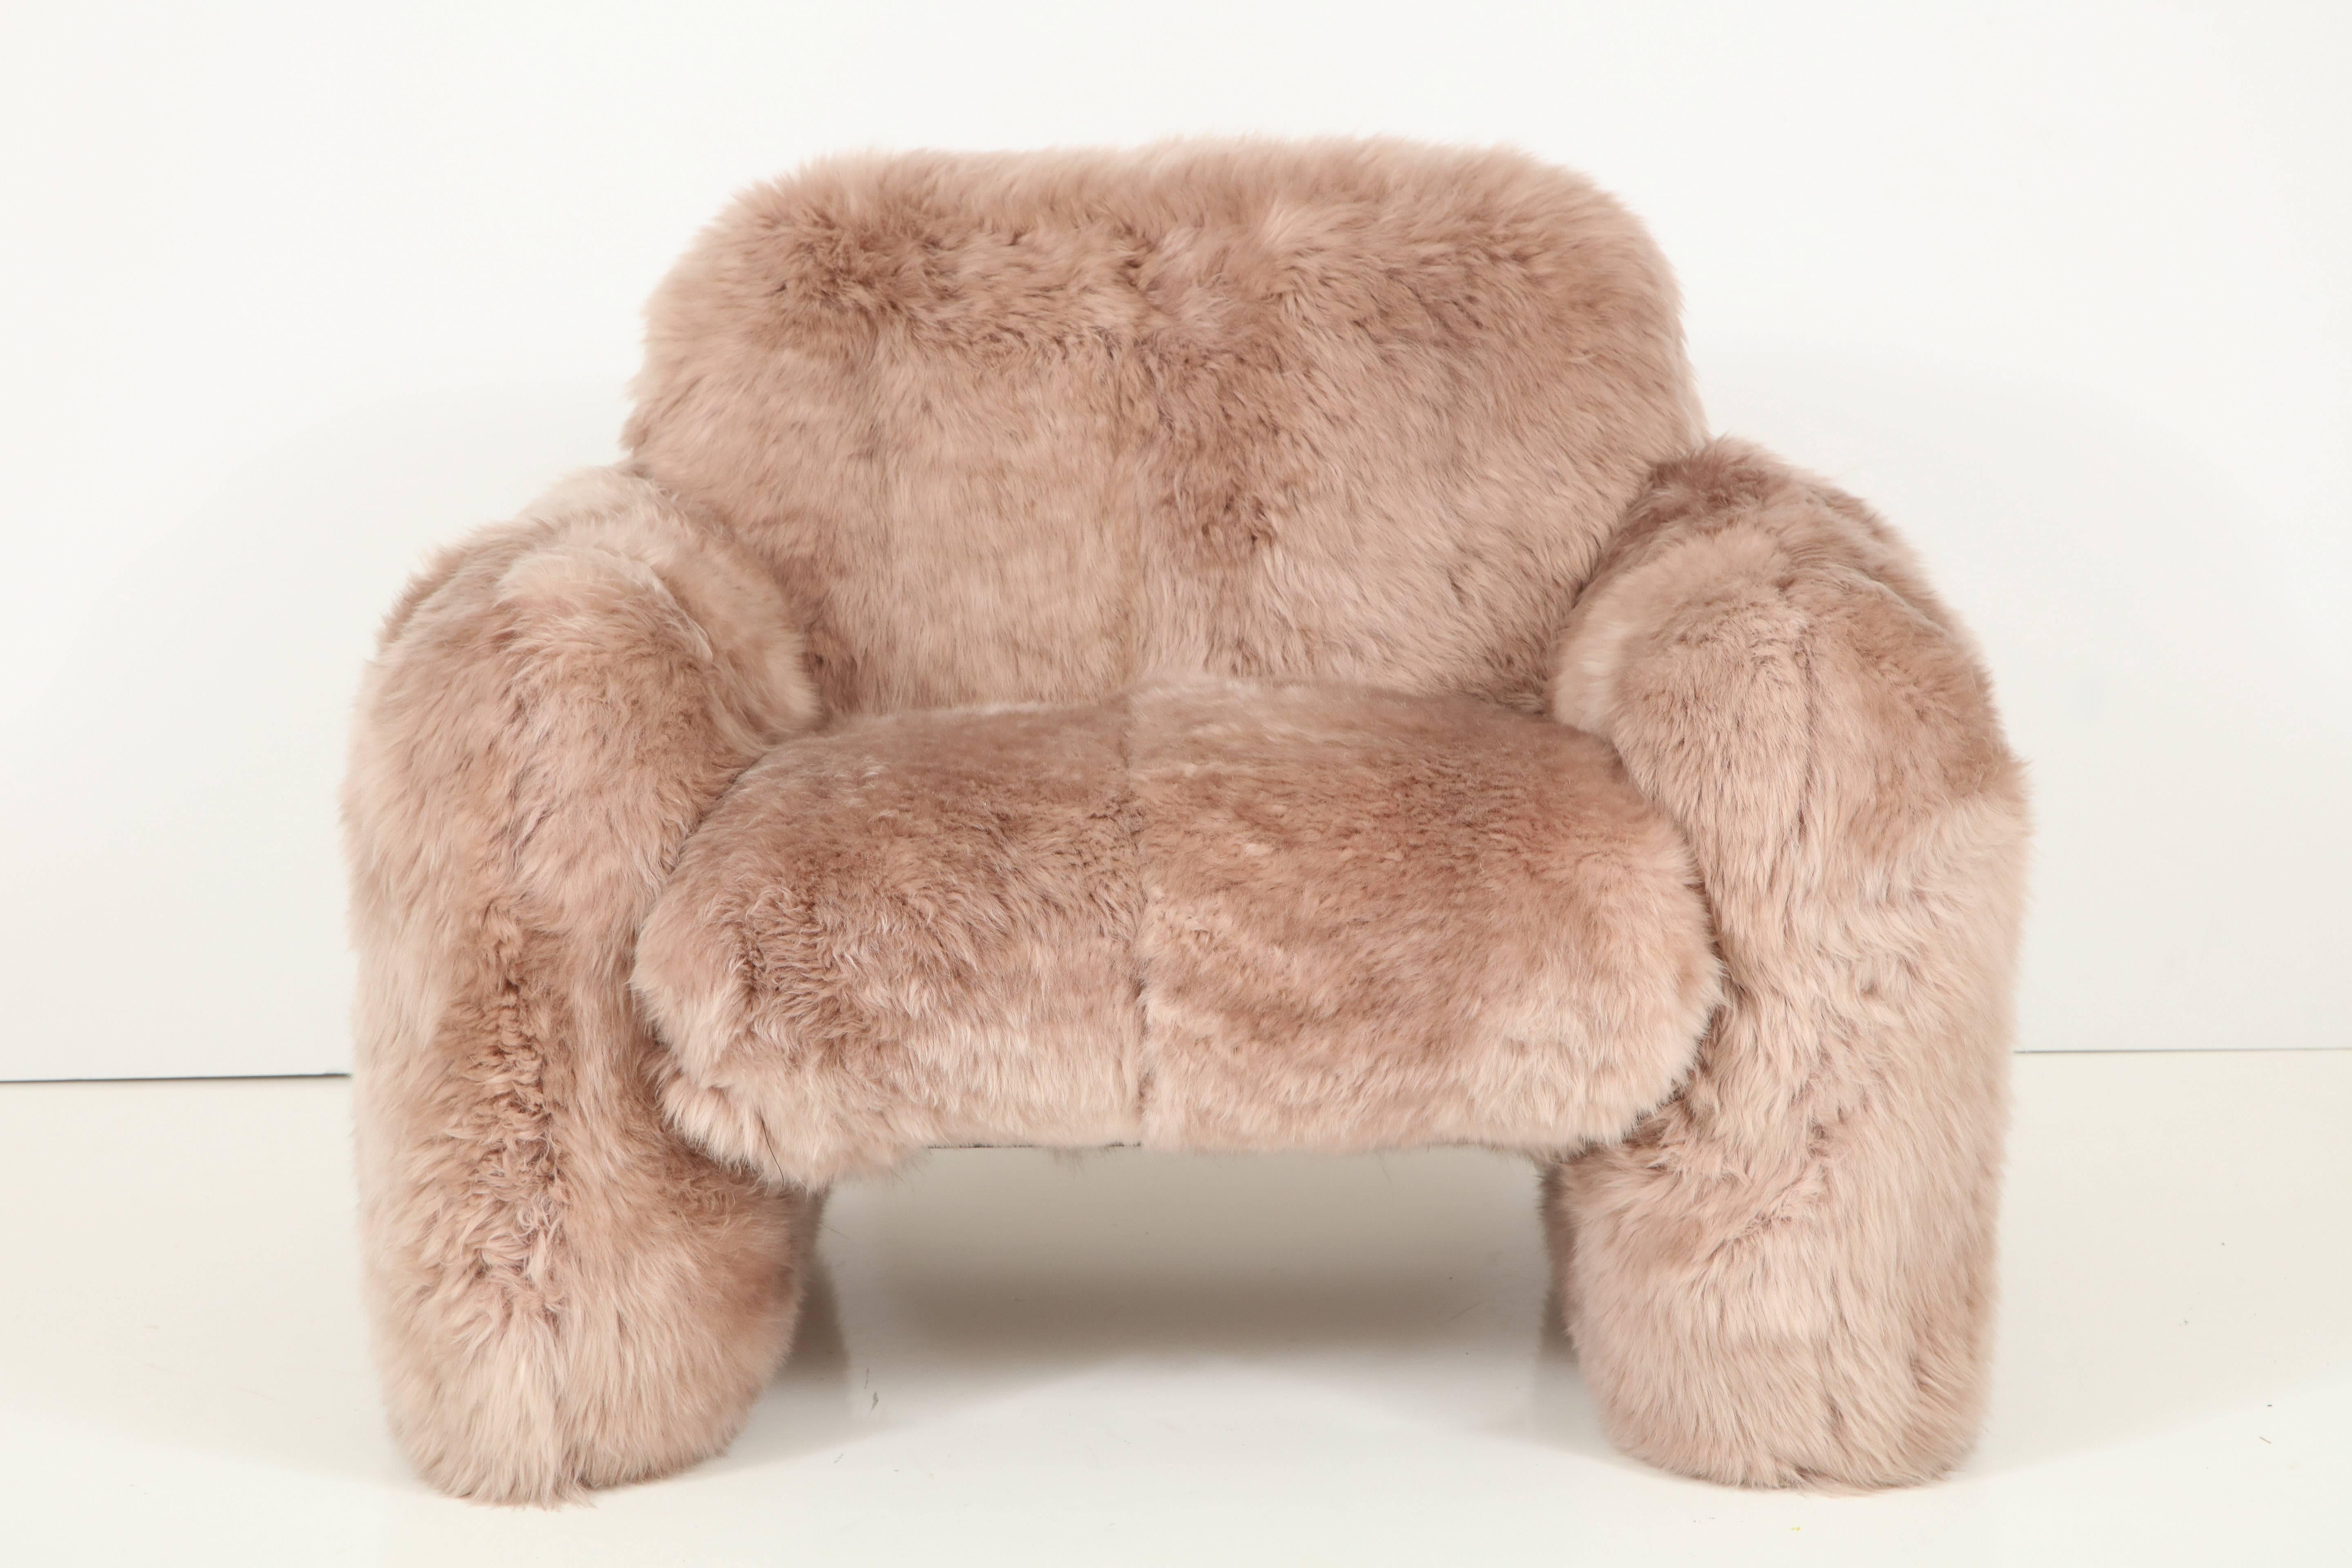 Dramatic and luxurious pair of club chairs upholstered in sandstone colored New Zealand sheepskin. The simplistic forms are the perfect platform to showcase the incredible soft and dense sheepskins. Chair frames are well constructed steel frames